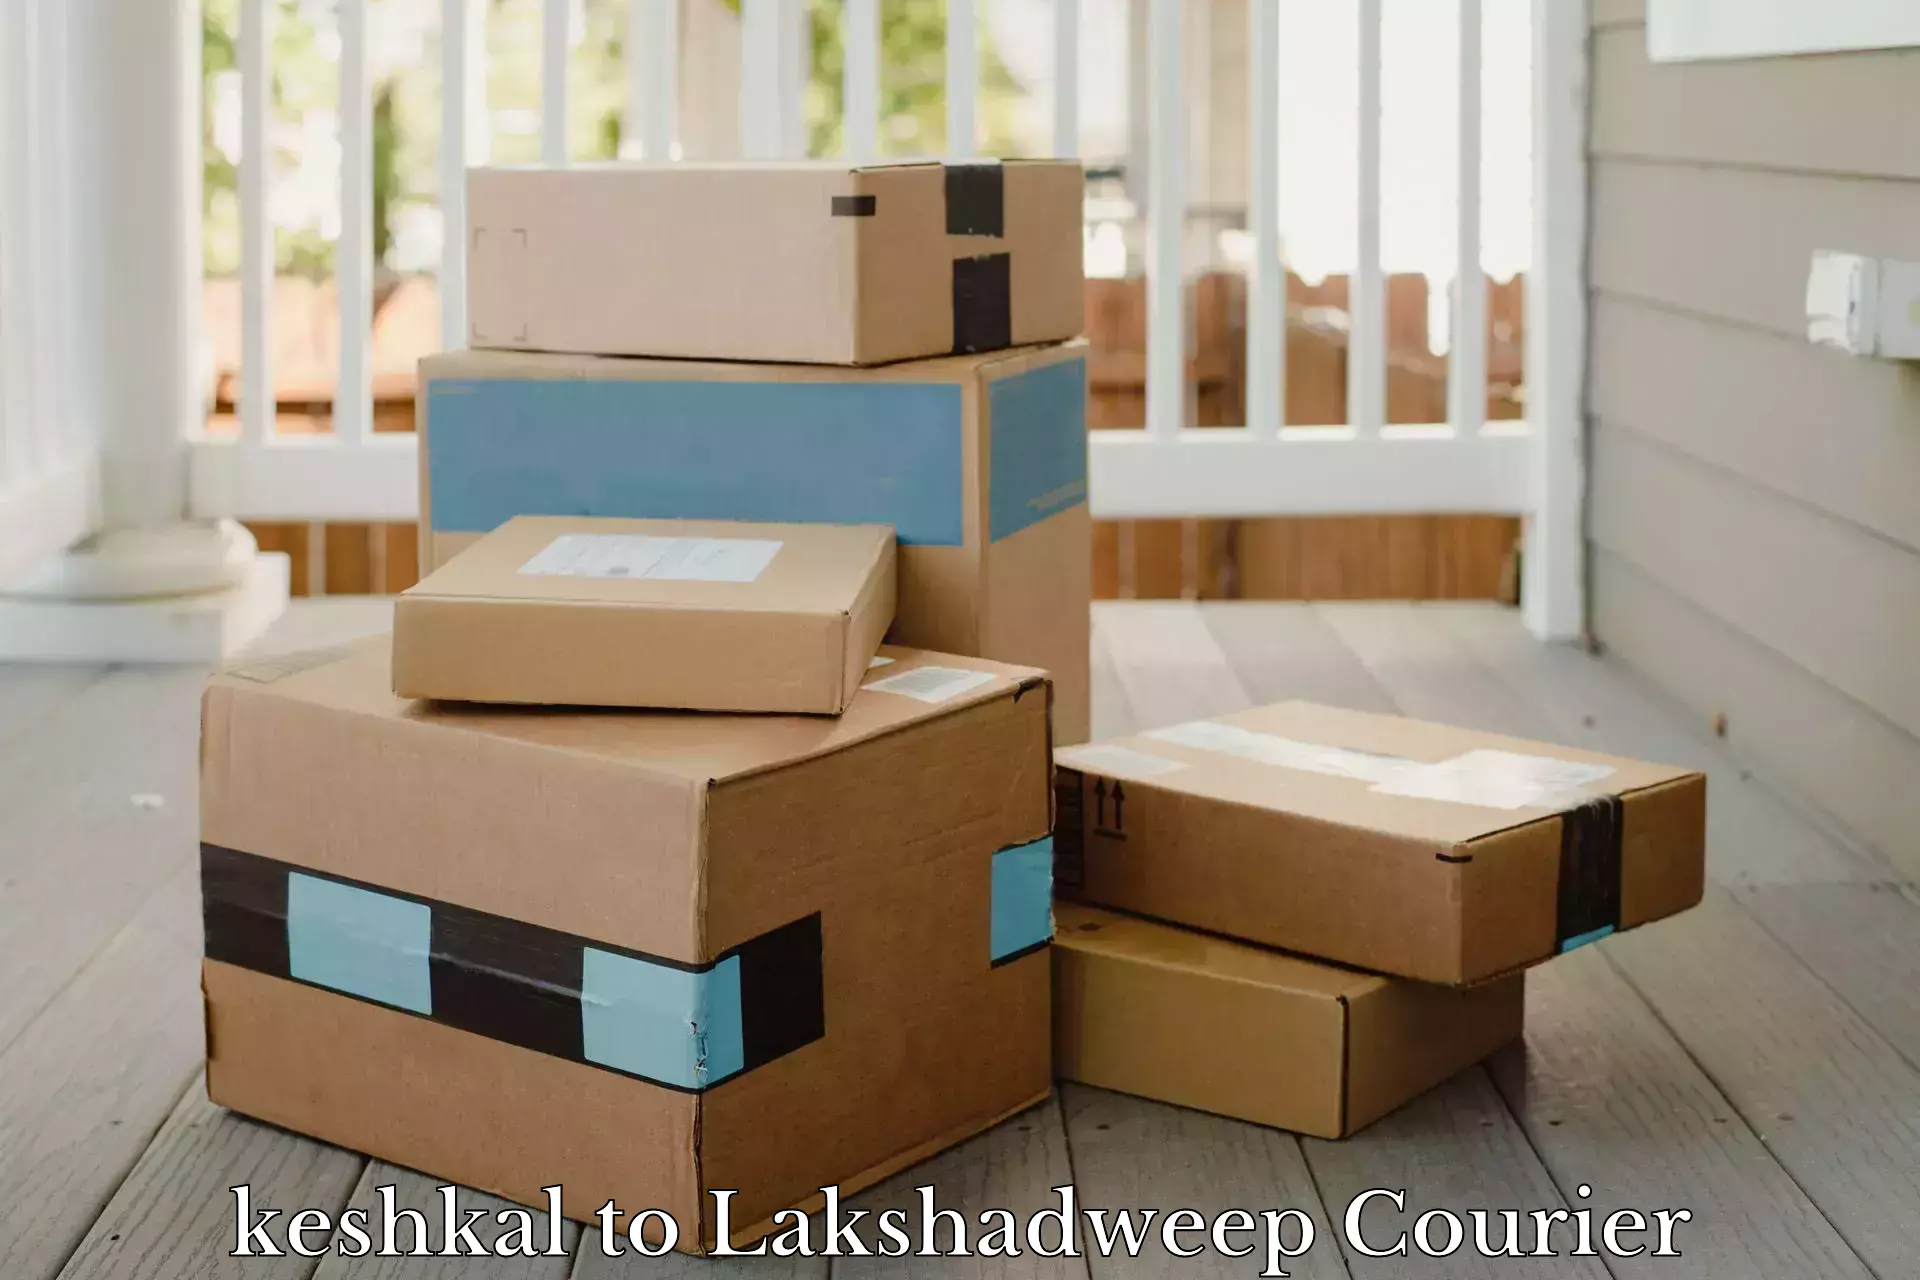 Subscription-based courier keshkal to Lakshadweep